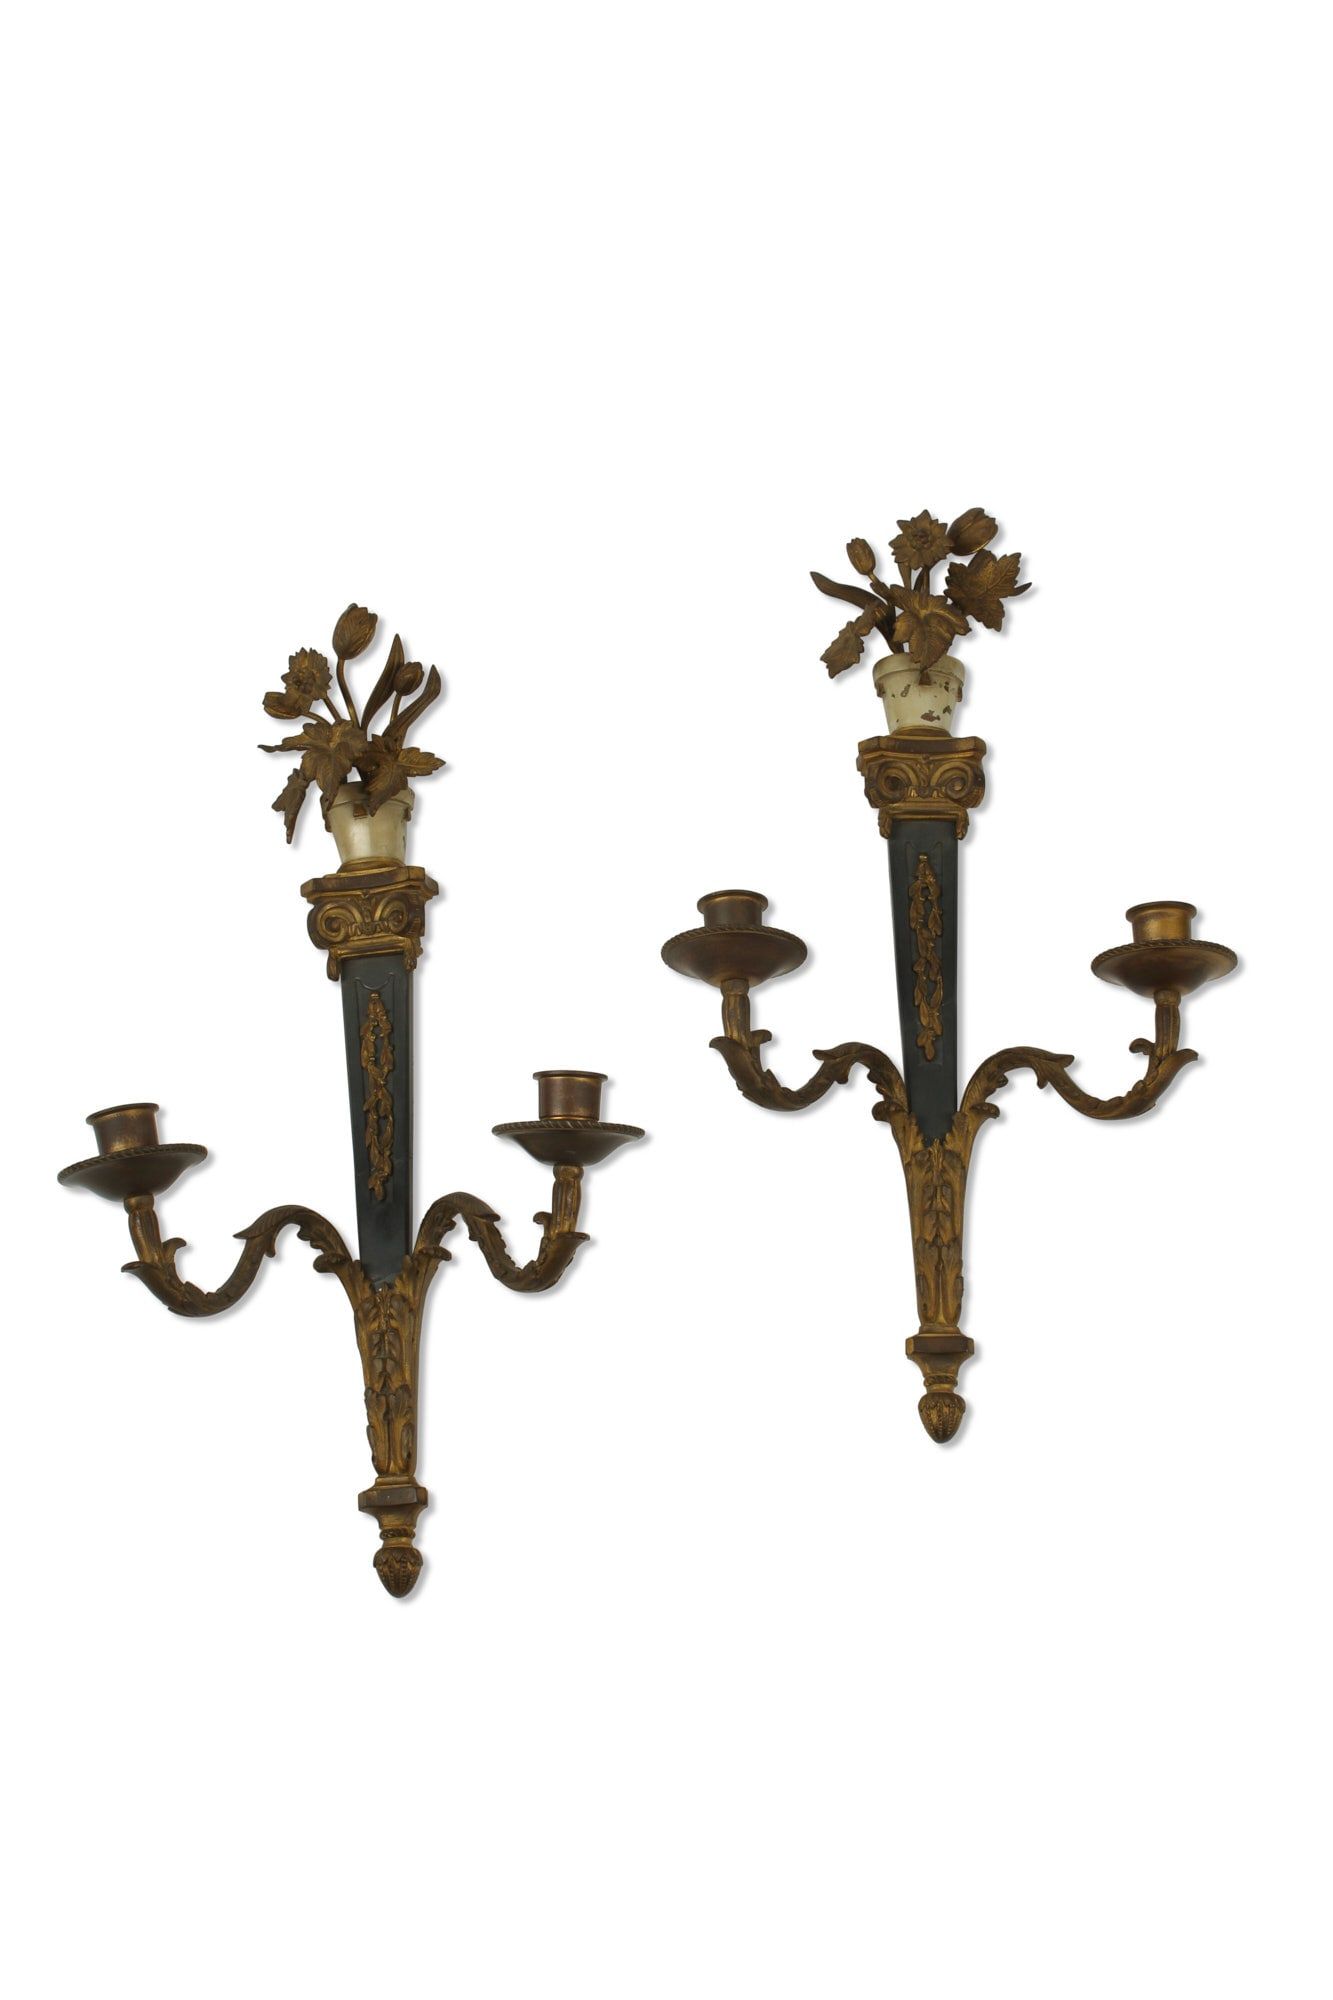 A PAIR OF EMPIRE STYLE WALL SCONCESA 2fb35b8